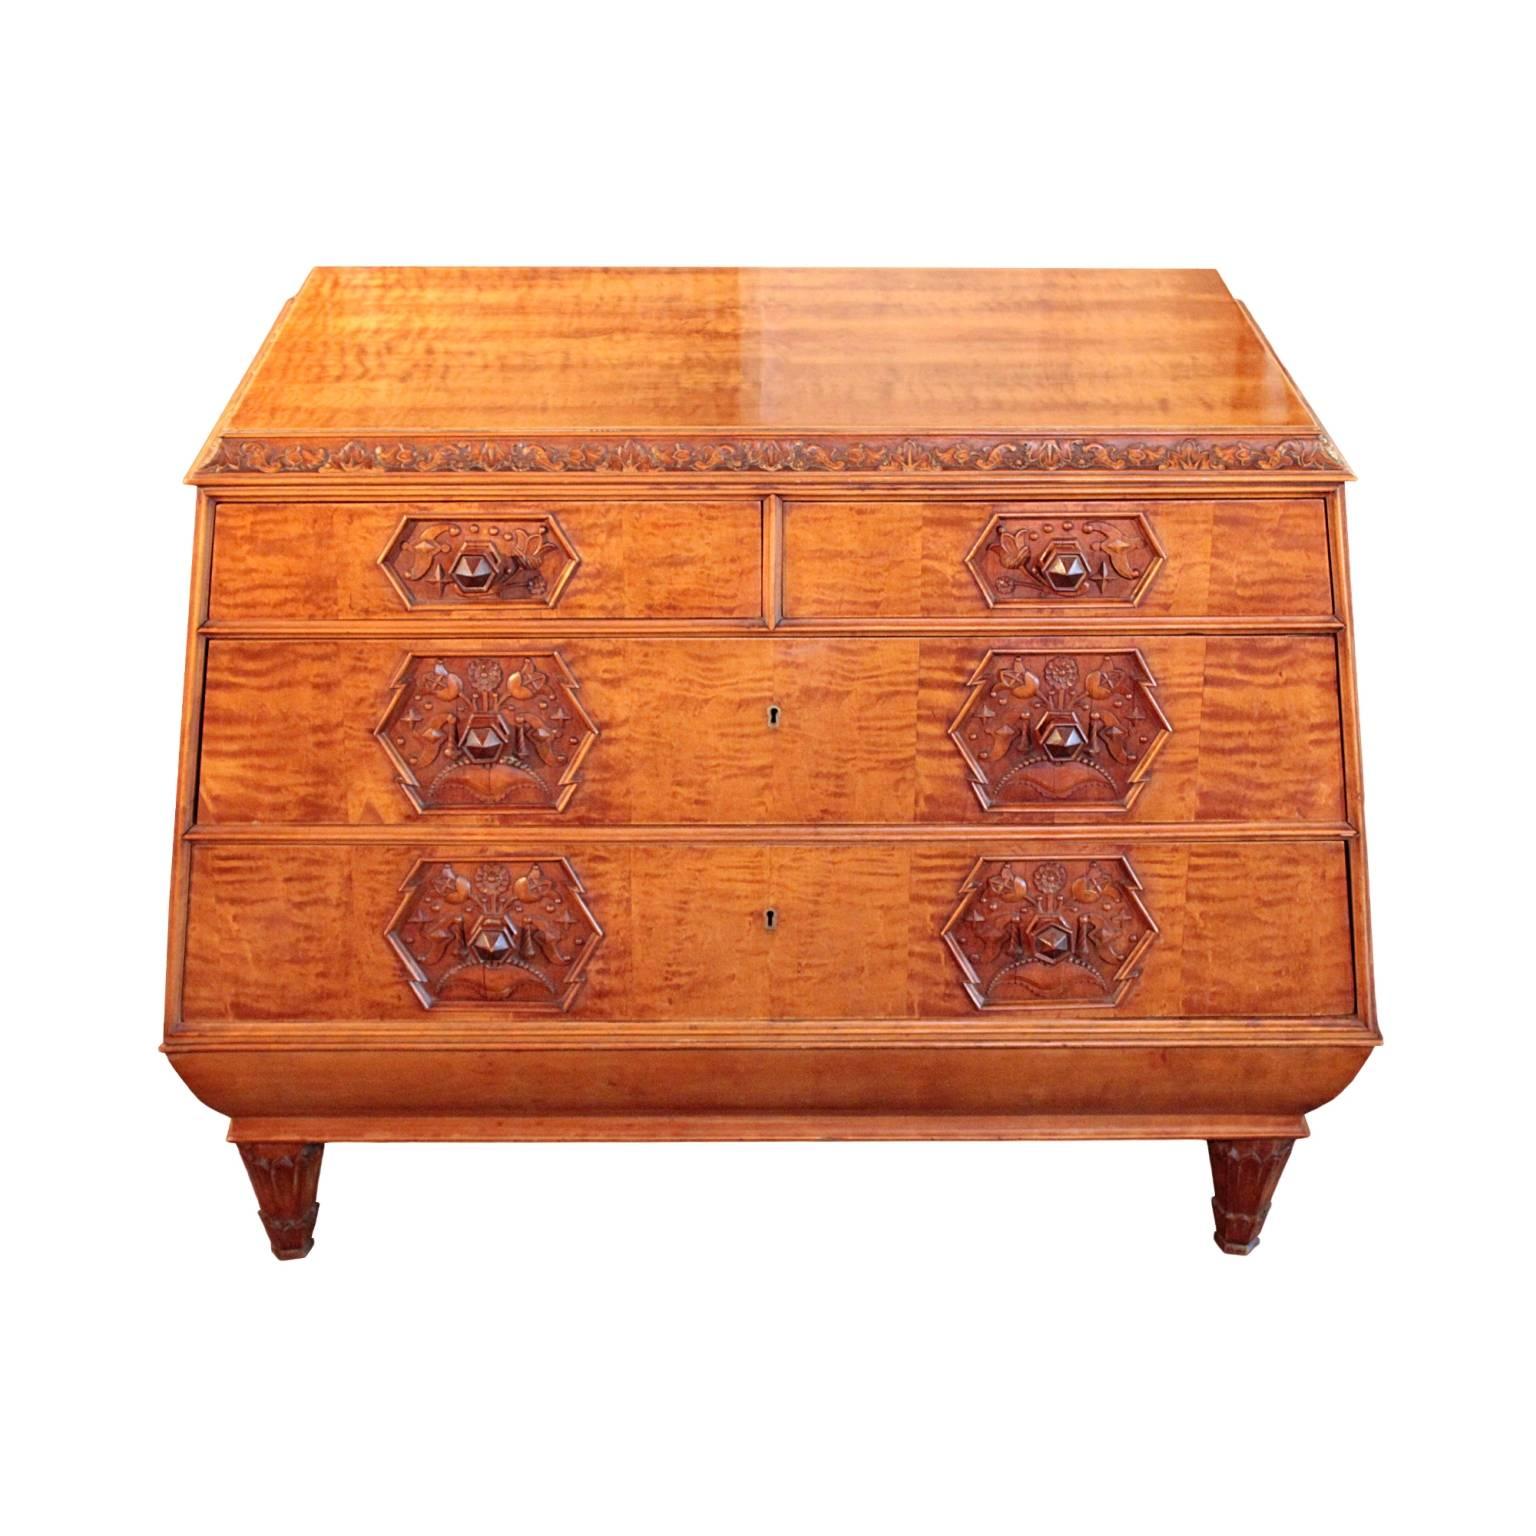 Highly unique German early 20th century chest of drawers, most likely sui generis. Featuring a lyre form cabinet with carved edge and four drawers with pair of smaller drawers in top row. Each drawer fitted with hexagonal pull central to exquisitely